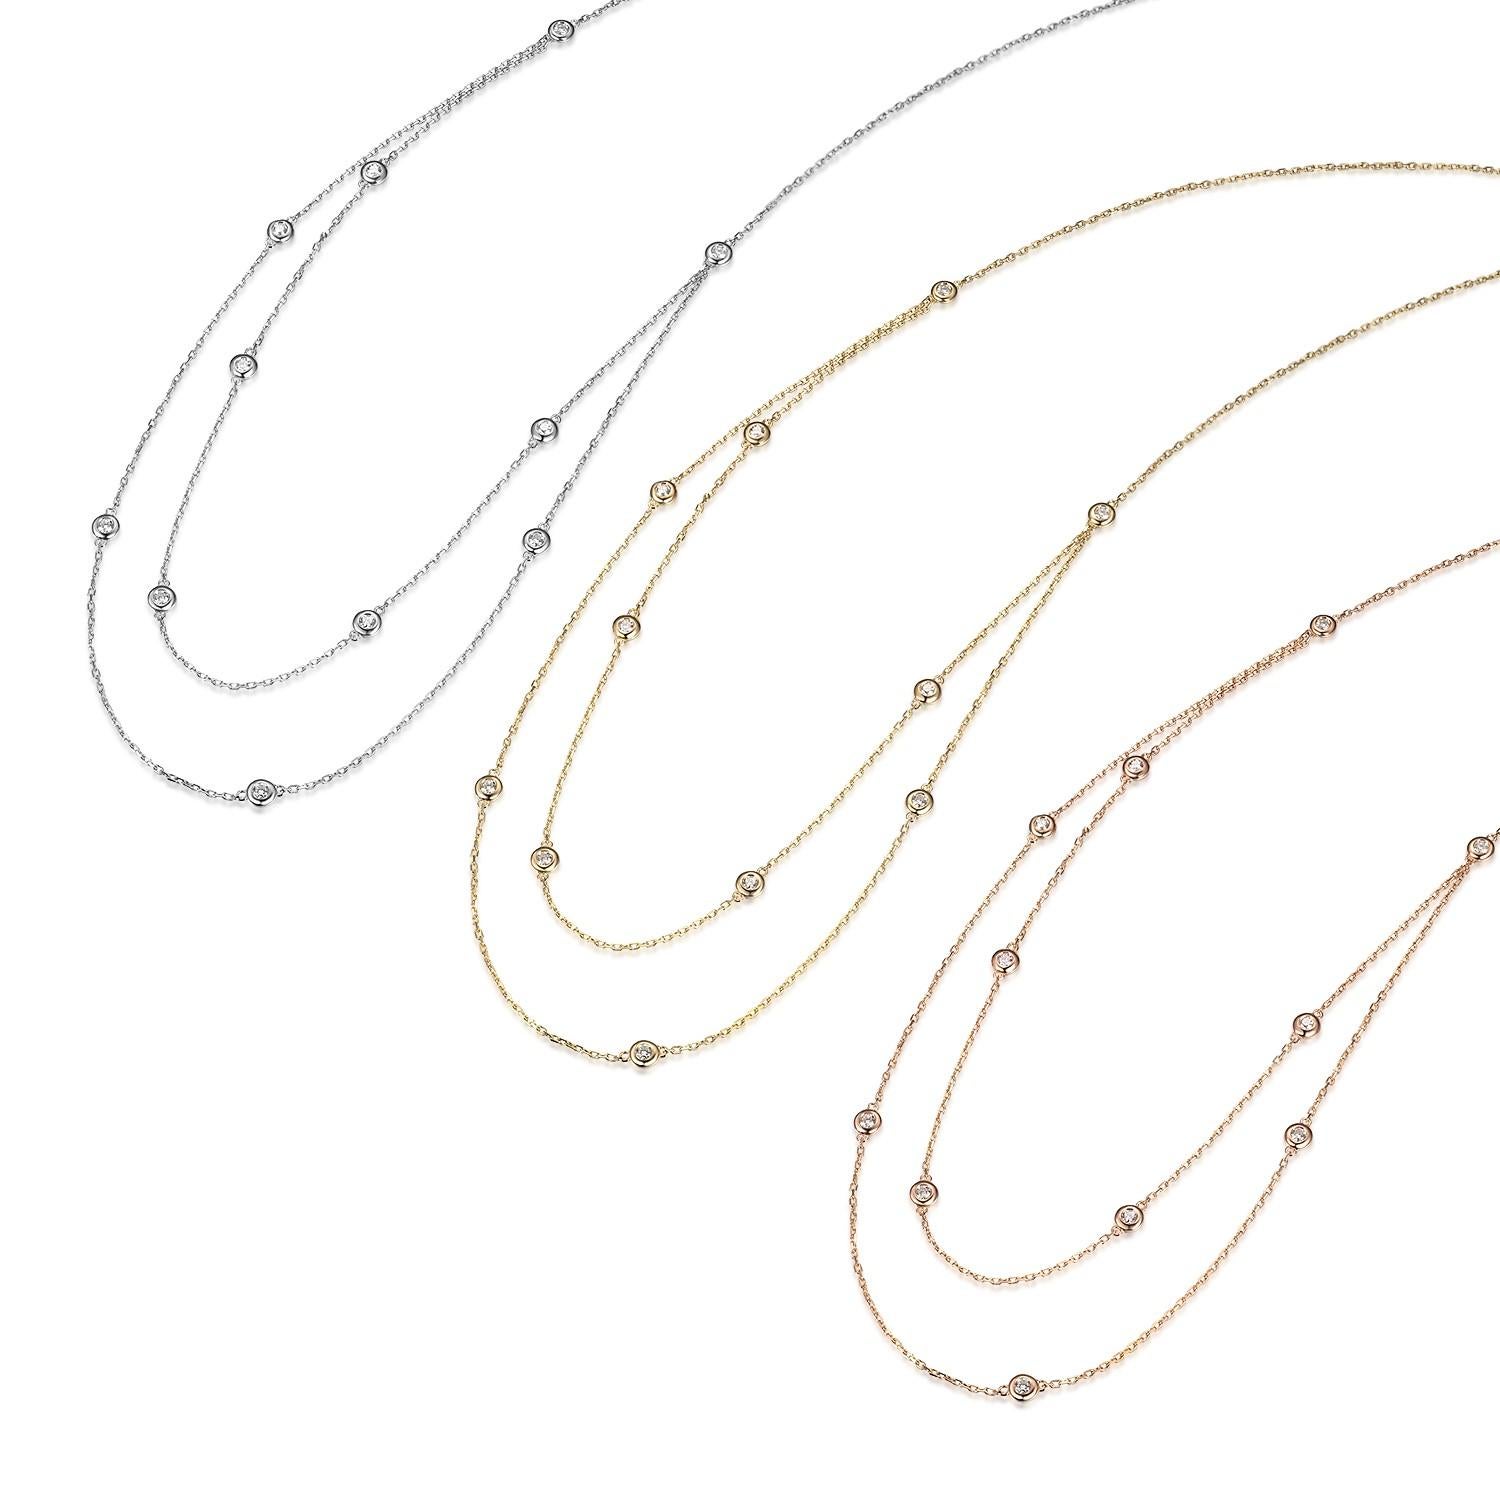 **Item is available in 18 karat rose gold/white gold/yellow gold, please send private message to confirm the gold color. **

0.40 Carats 11-Station Diamond by the yard necklace set in 18K gold. The total weight is 0.40 ctw. Beautiful shiny stones.